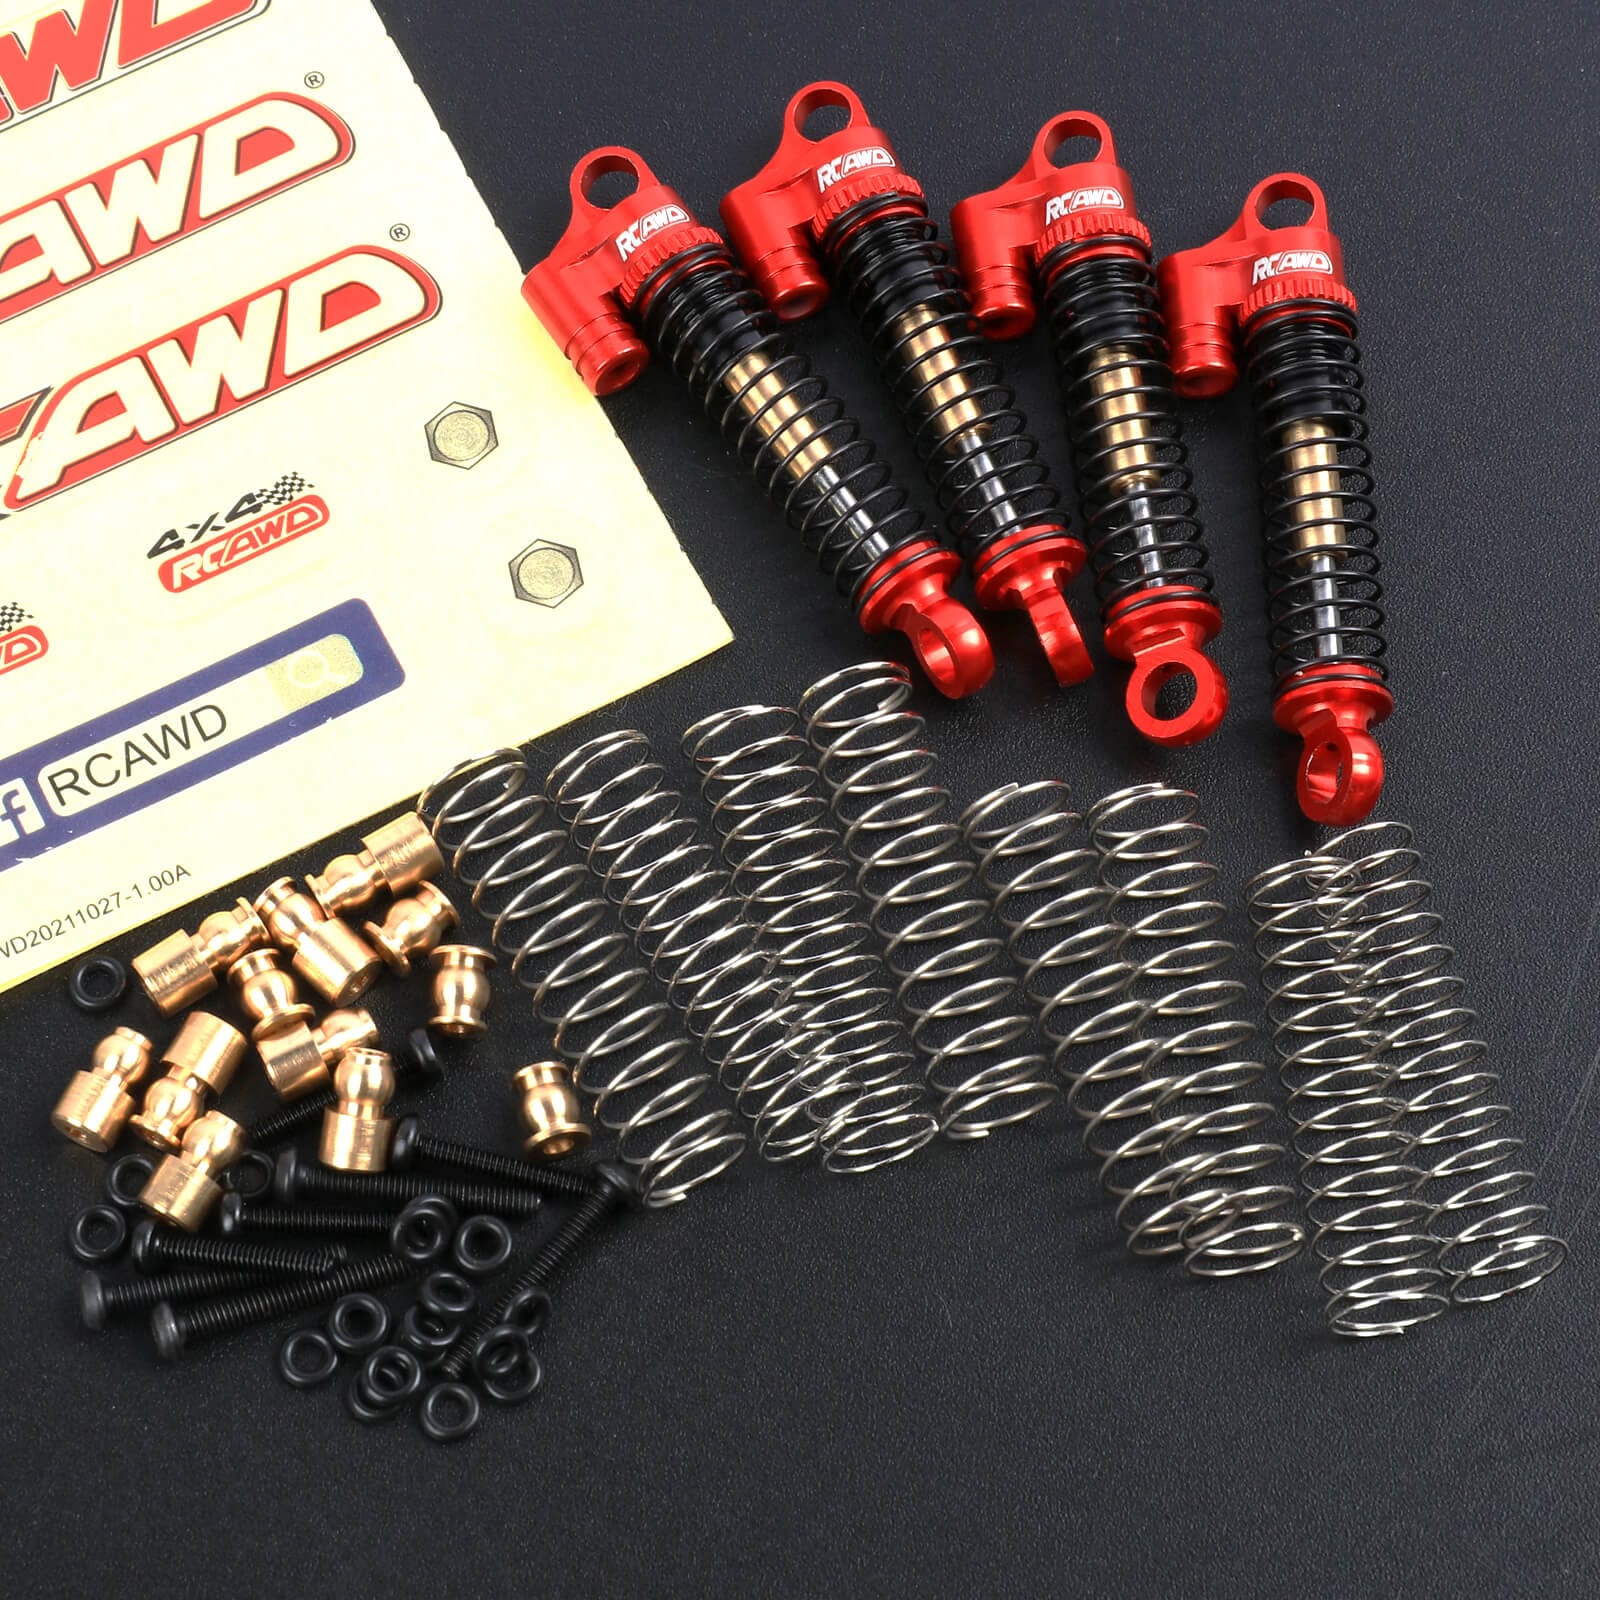 RCAWD HobbyPlus CR18 RCAWD 1/18 HobbyPlus CR18 Upgrades Shocks Double Barrel 43mm Front Rear Shock 240304